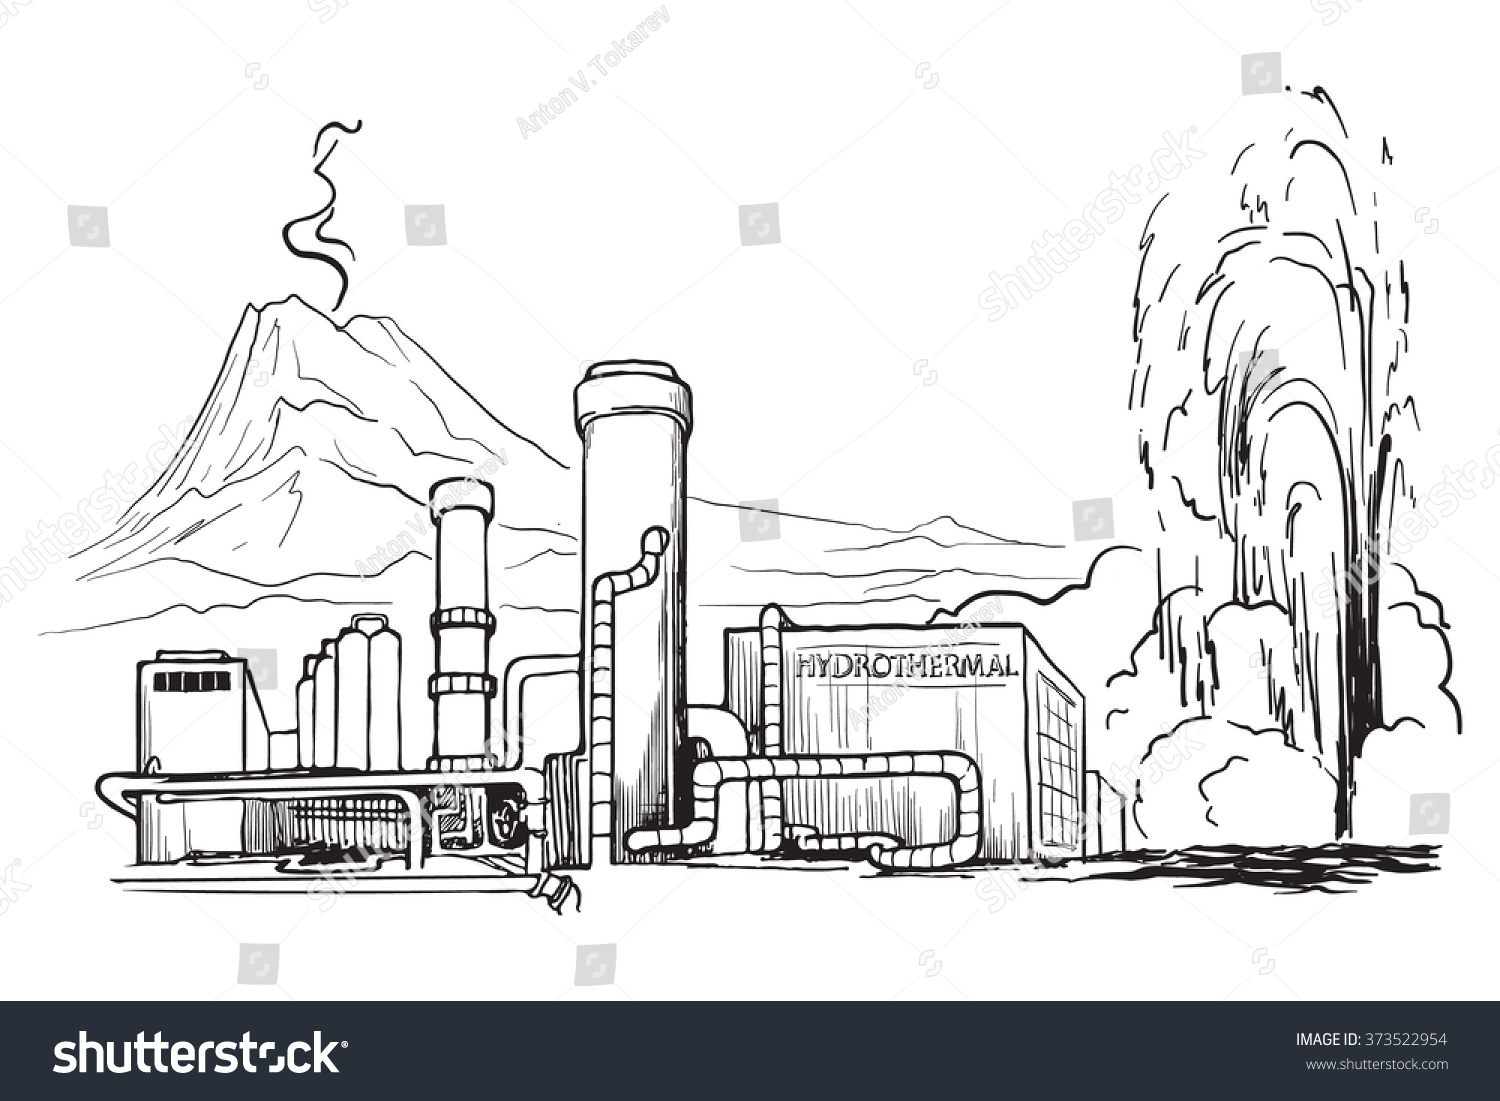 Image result for power station drawing